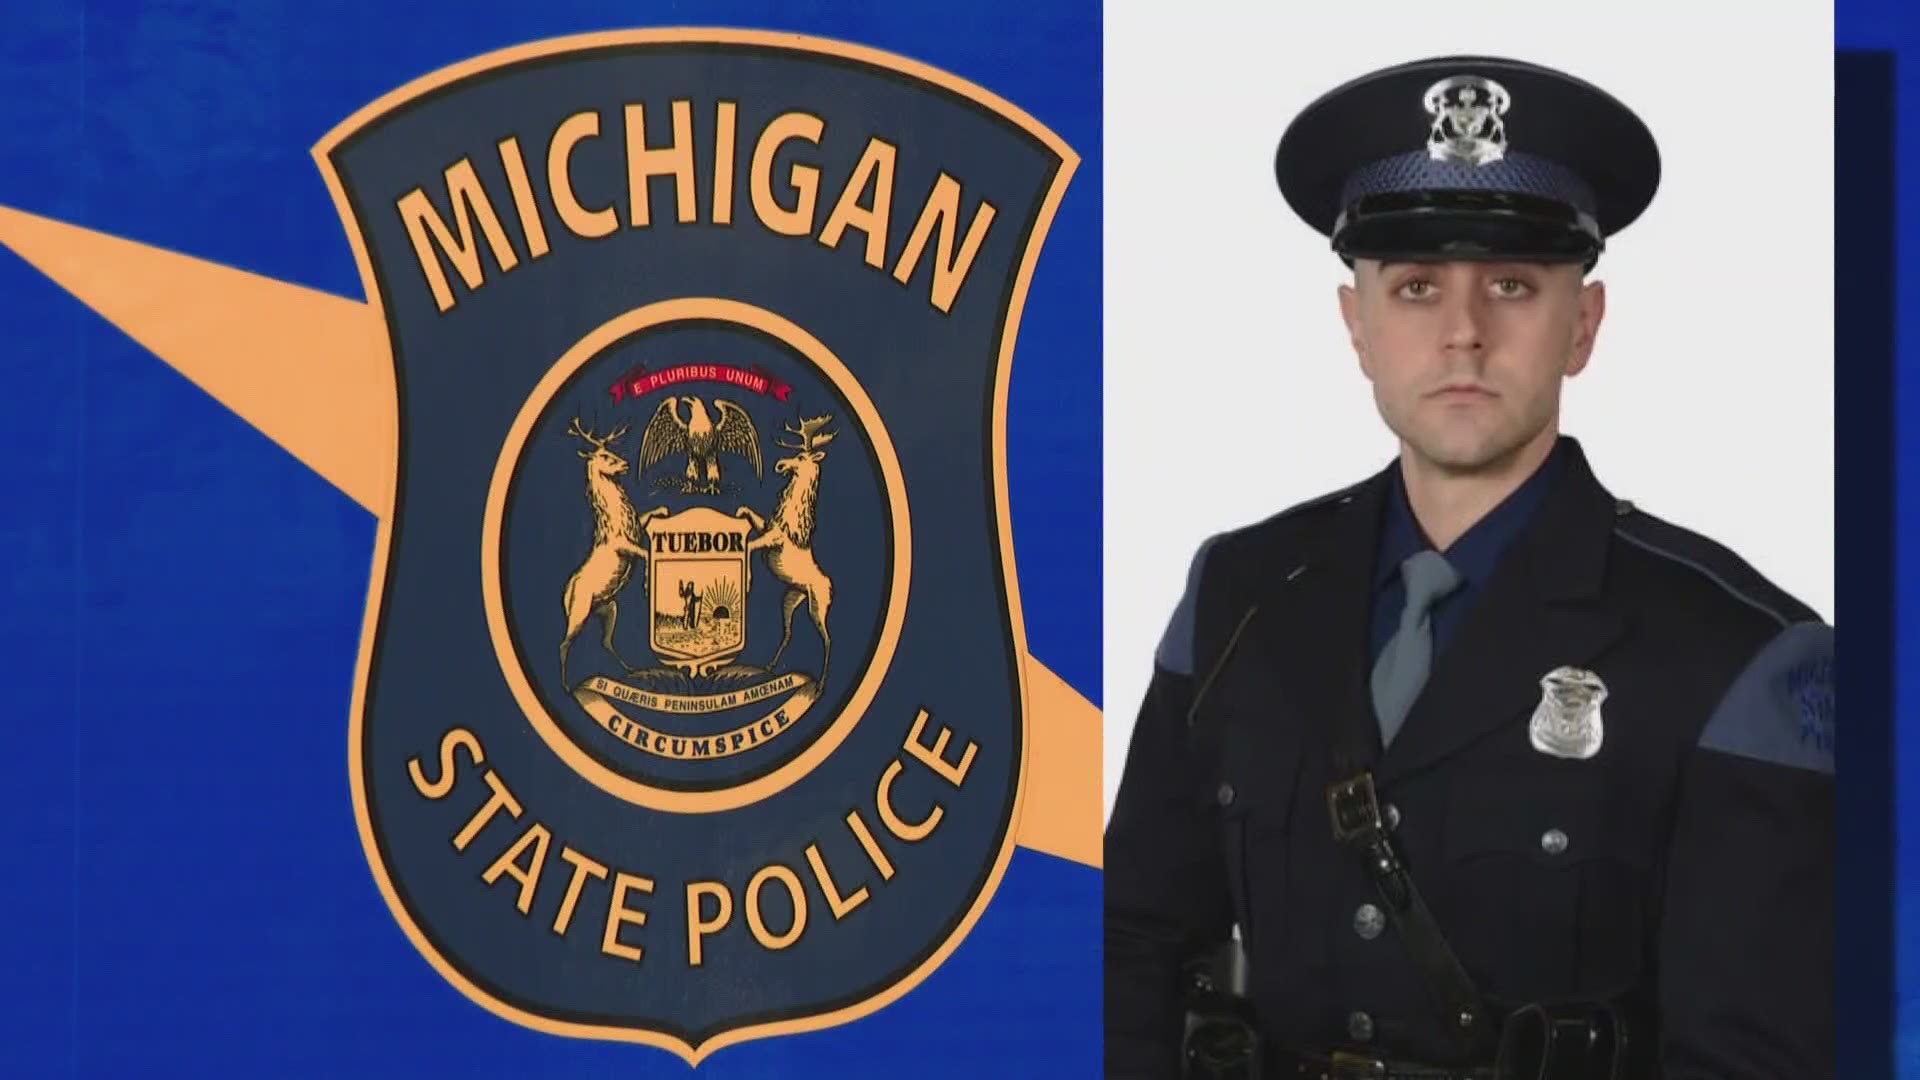 Trooper Caleb Starr, a married father of two, died July 31 from injuries suffered three weeks earlier in a head-on crash in western Ionia County.